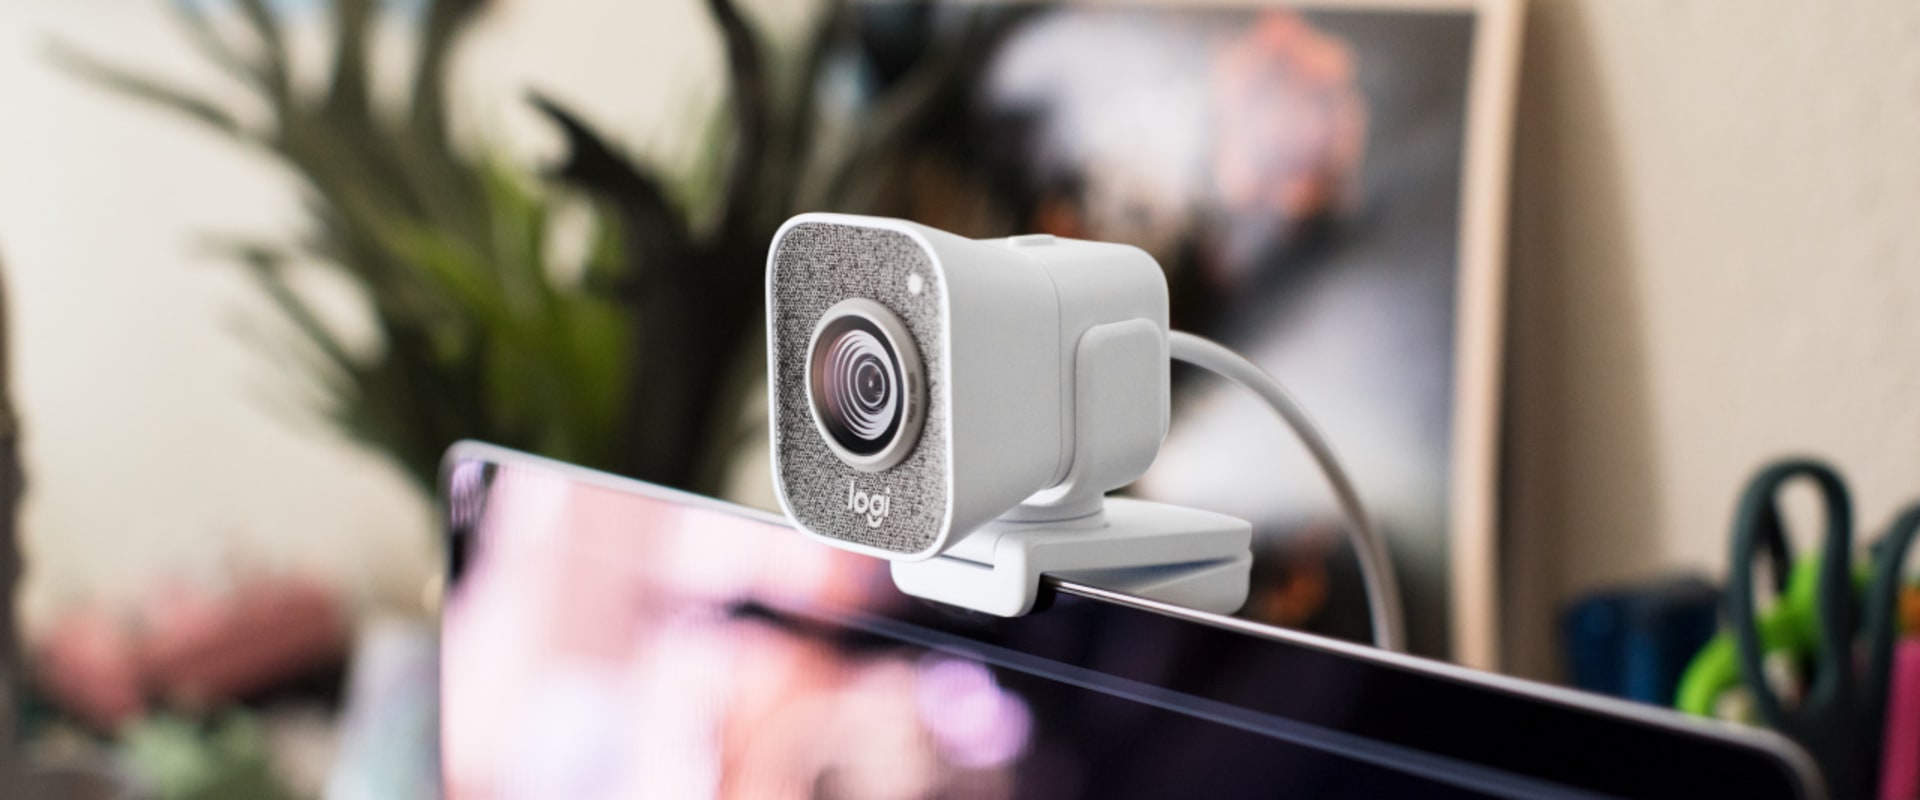 Wireless Webcams: Everything You Need to Know